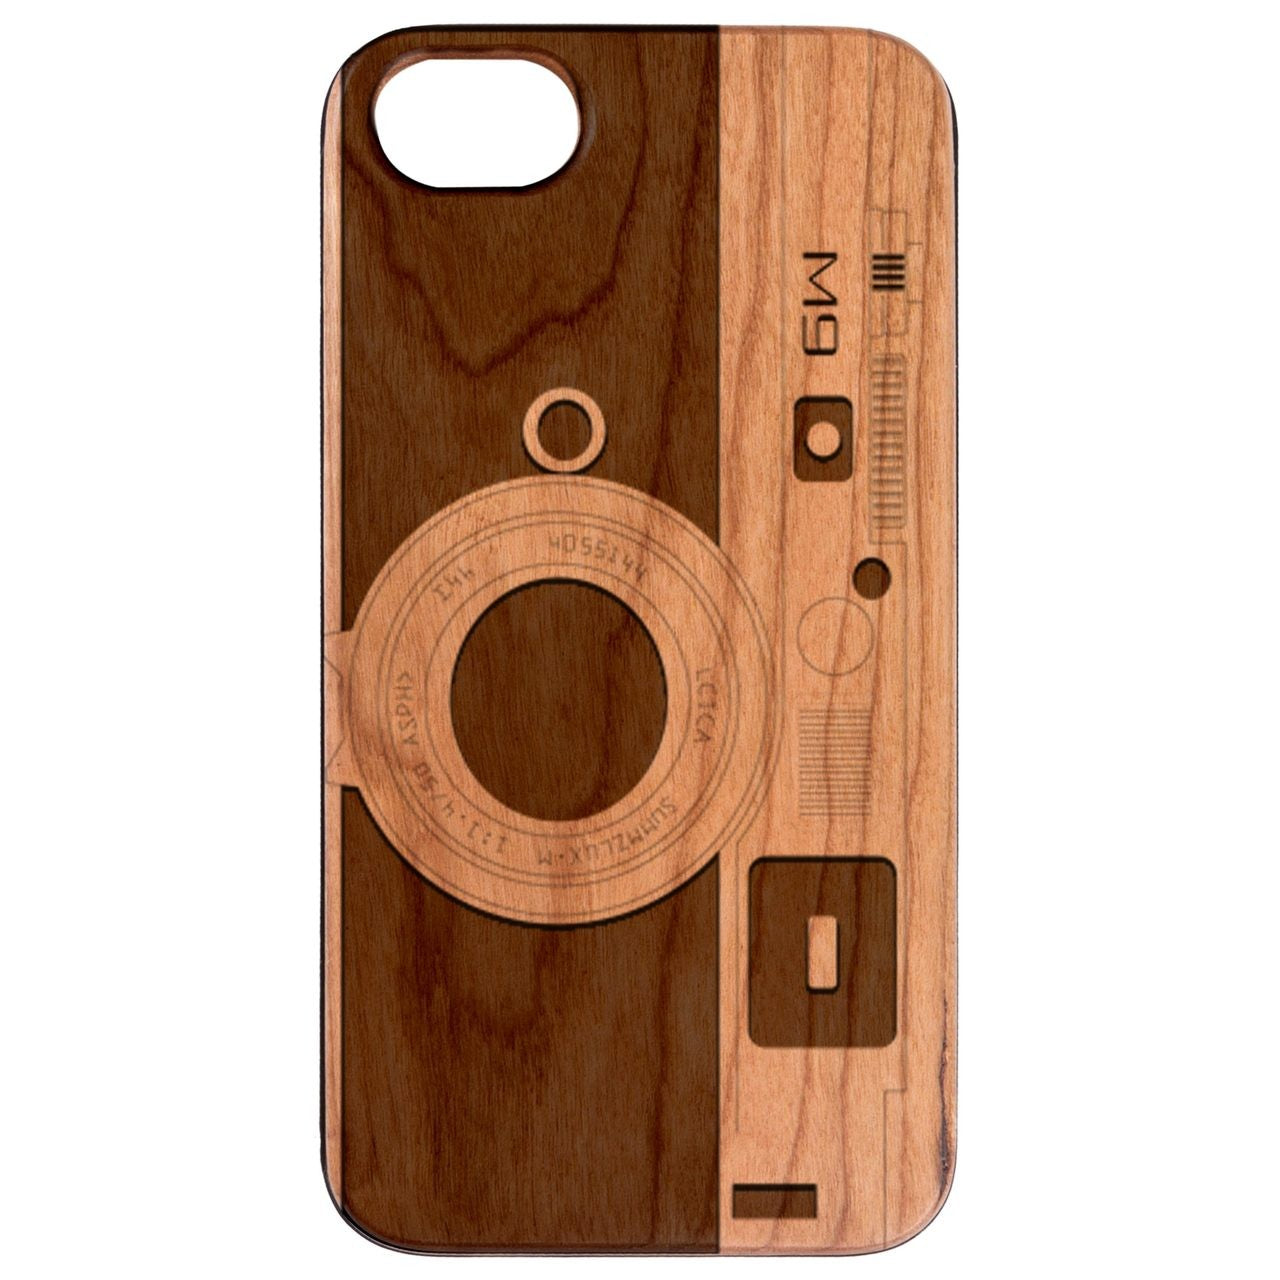  M9 Camera - Engraved - Wooden Phone Case - IPhone 13 Models